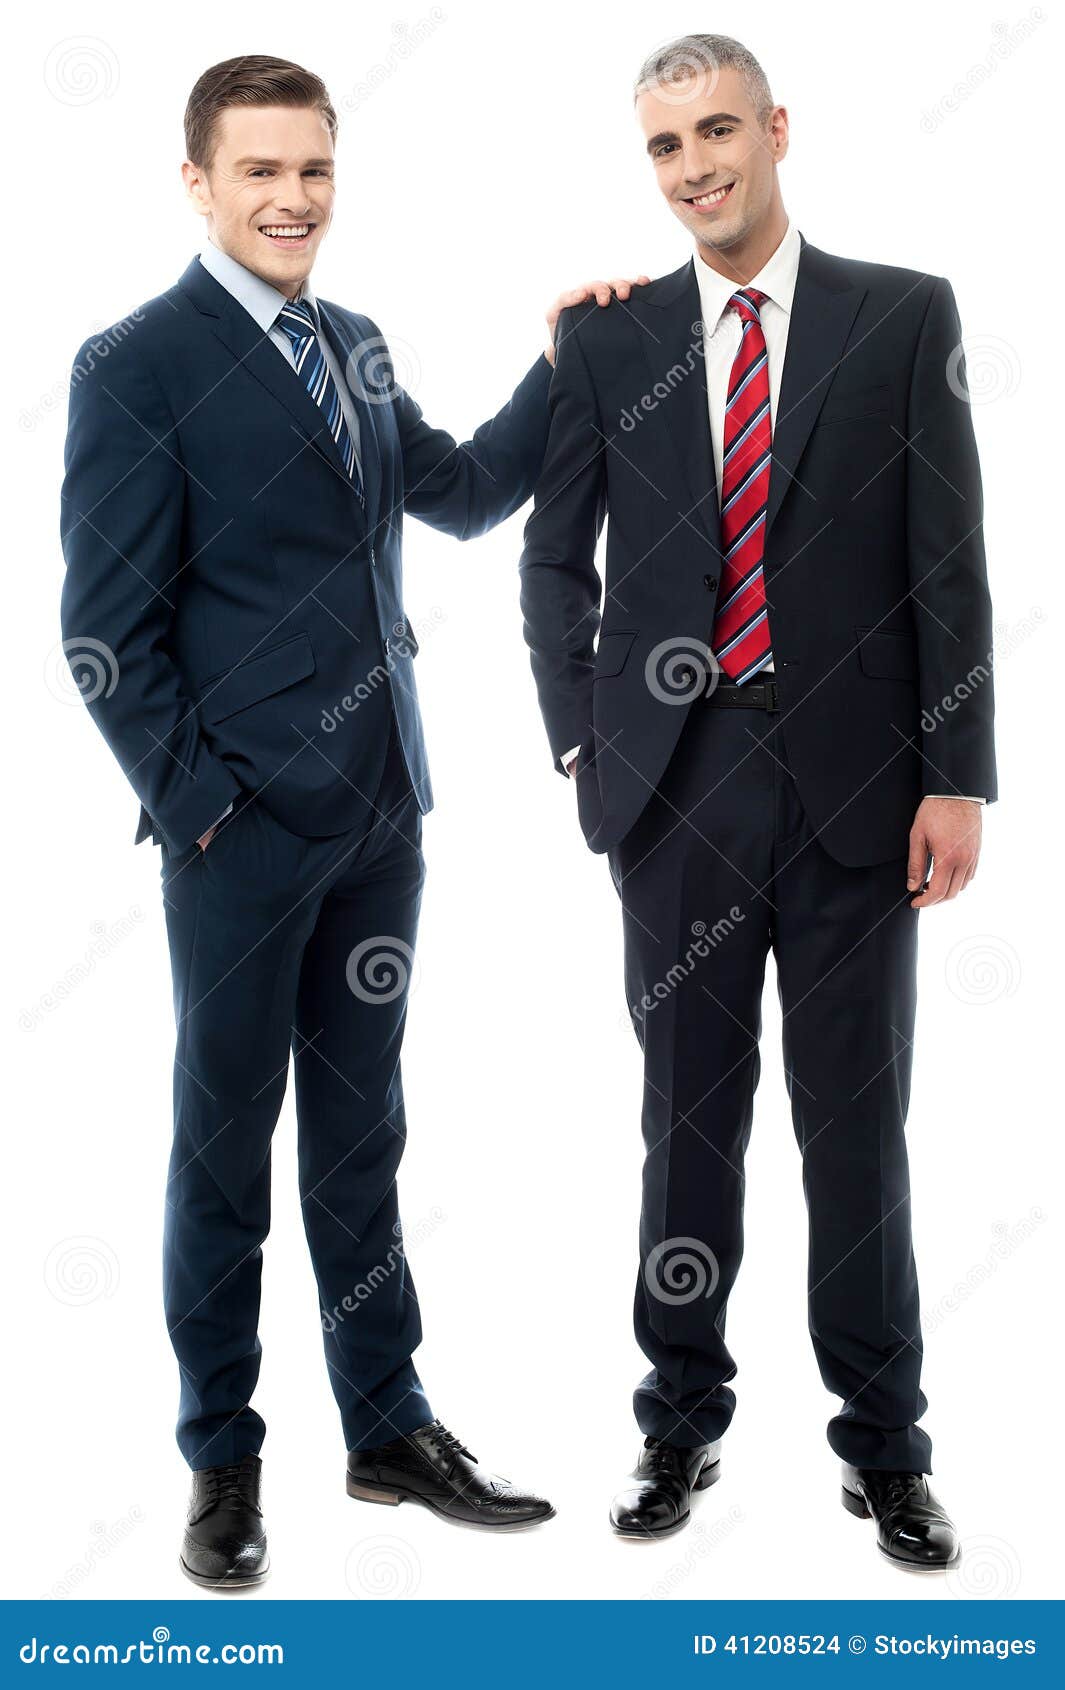 Two Business Partners Posing Together Stock Photo - Image: 41208524